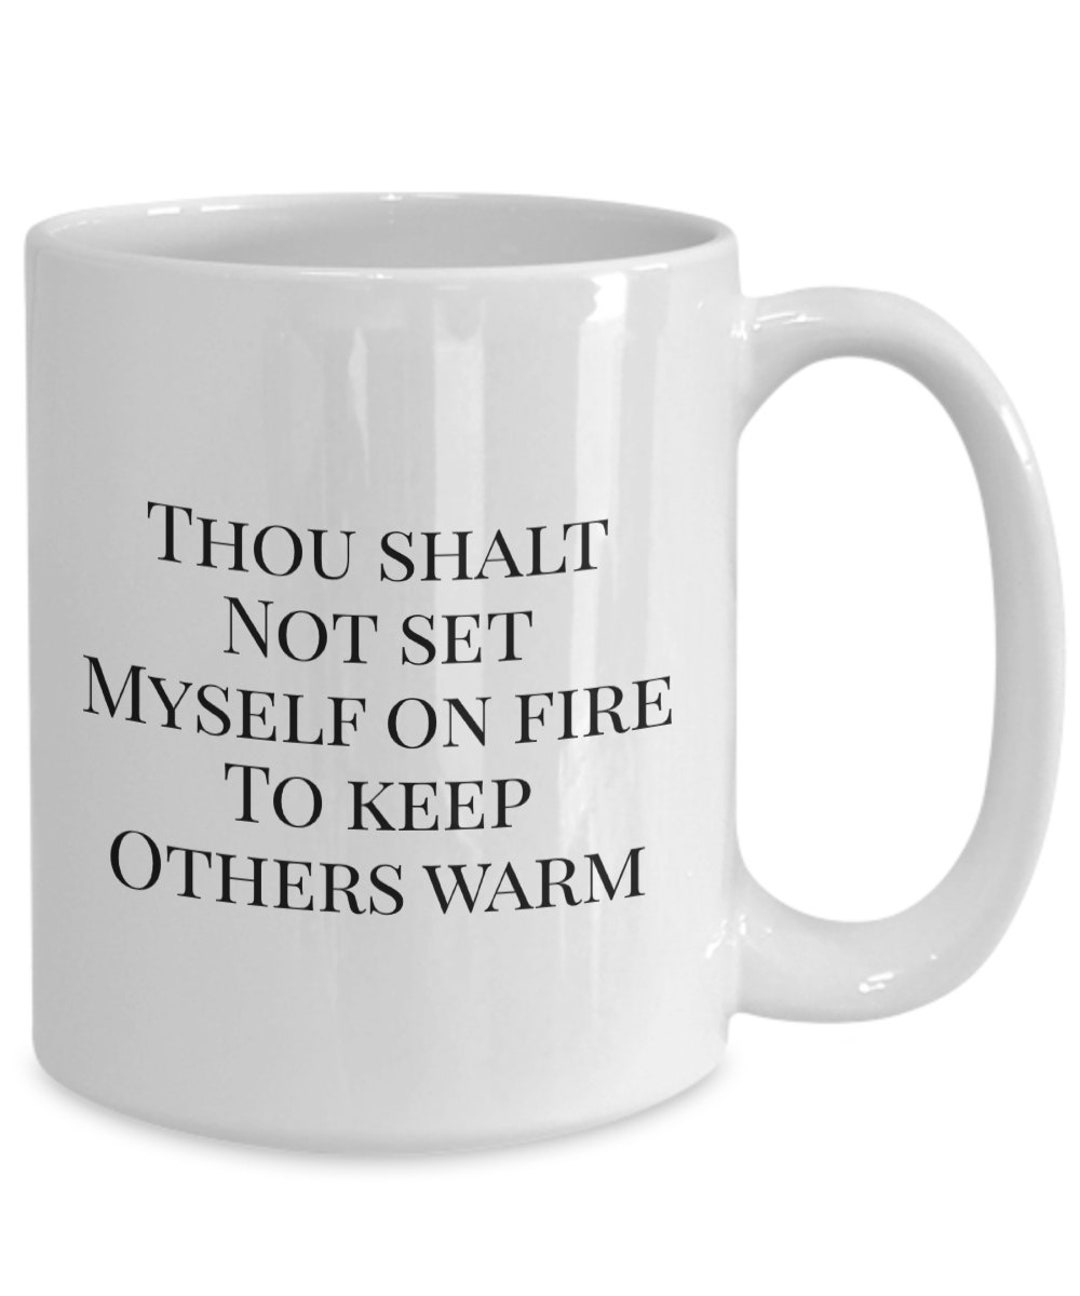 Not Required to Set Self on Fire to Keep Others Warm Coffee Mug 